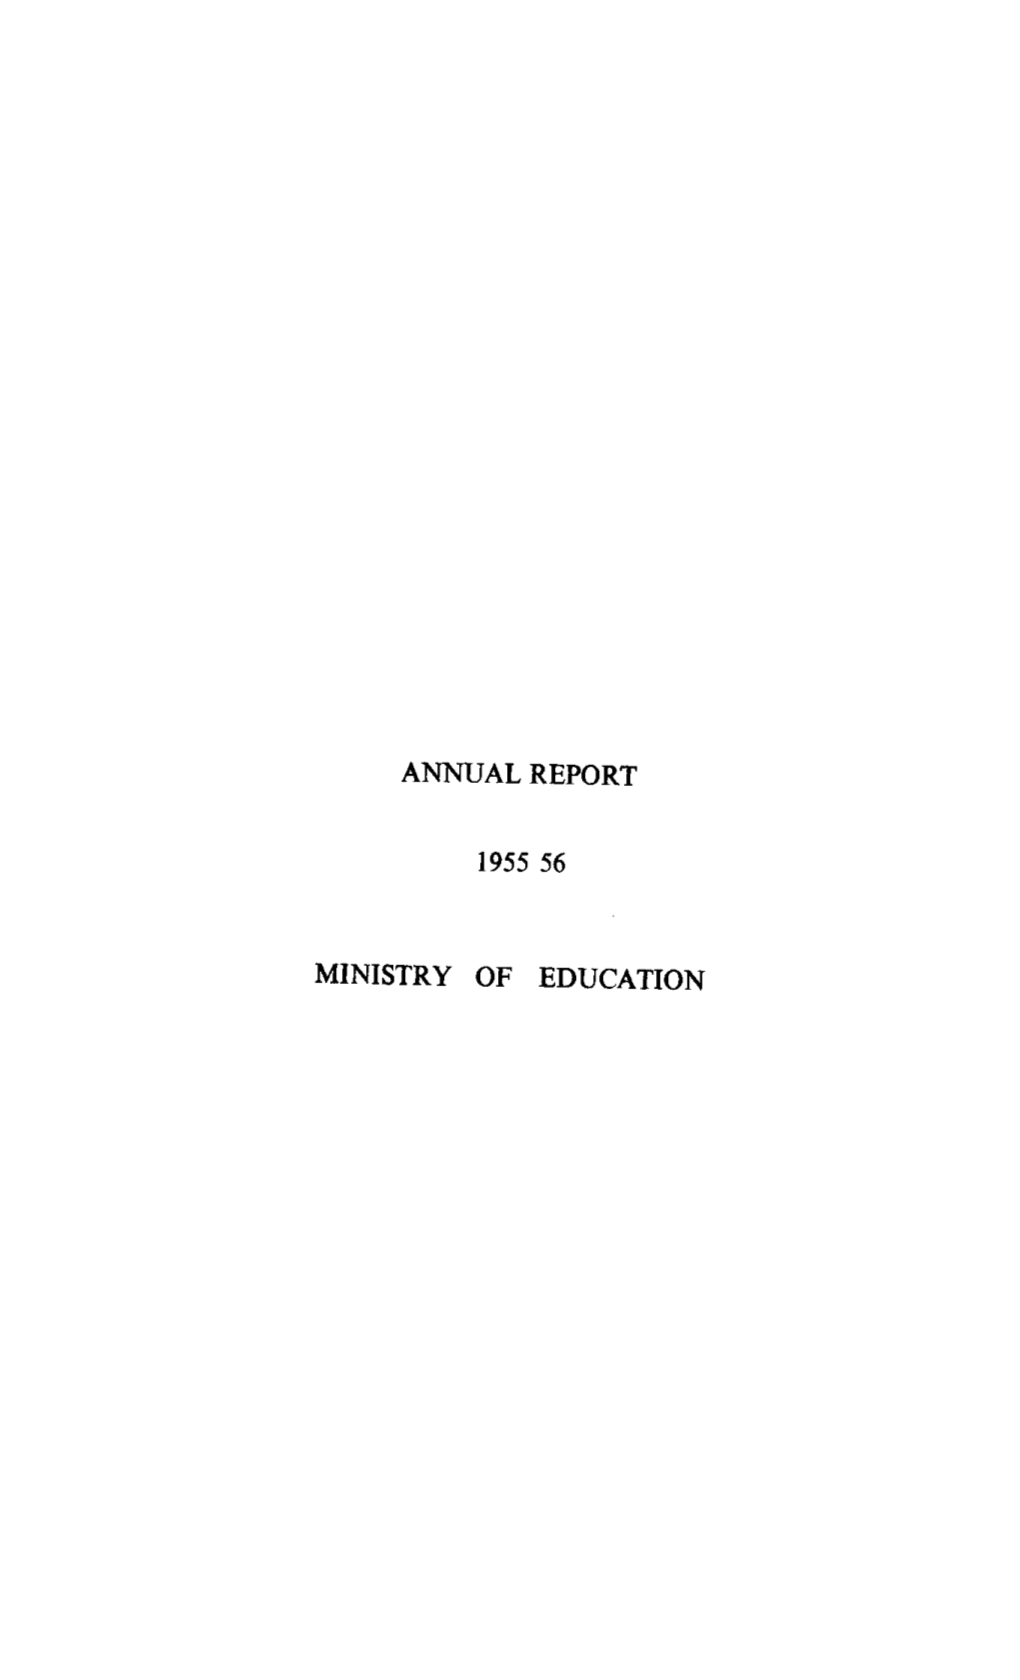 Annual Report 1955 56 Ministry of Education